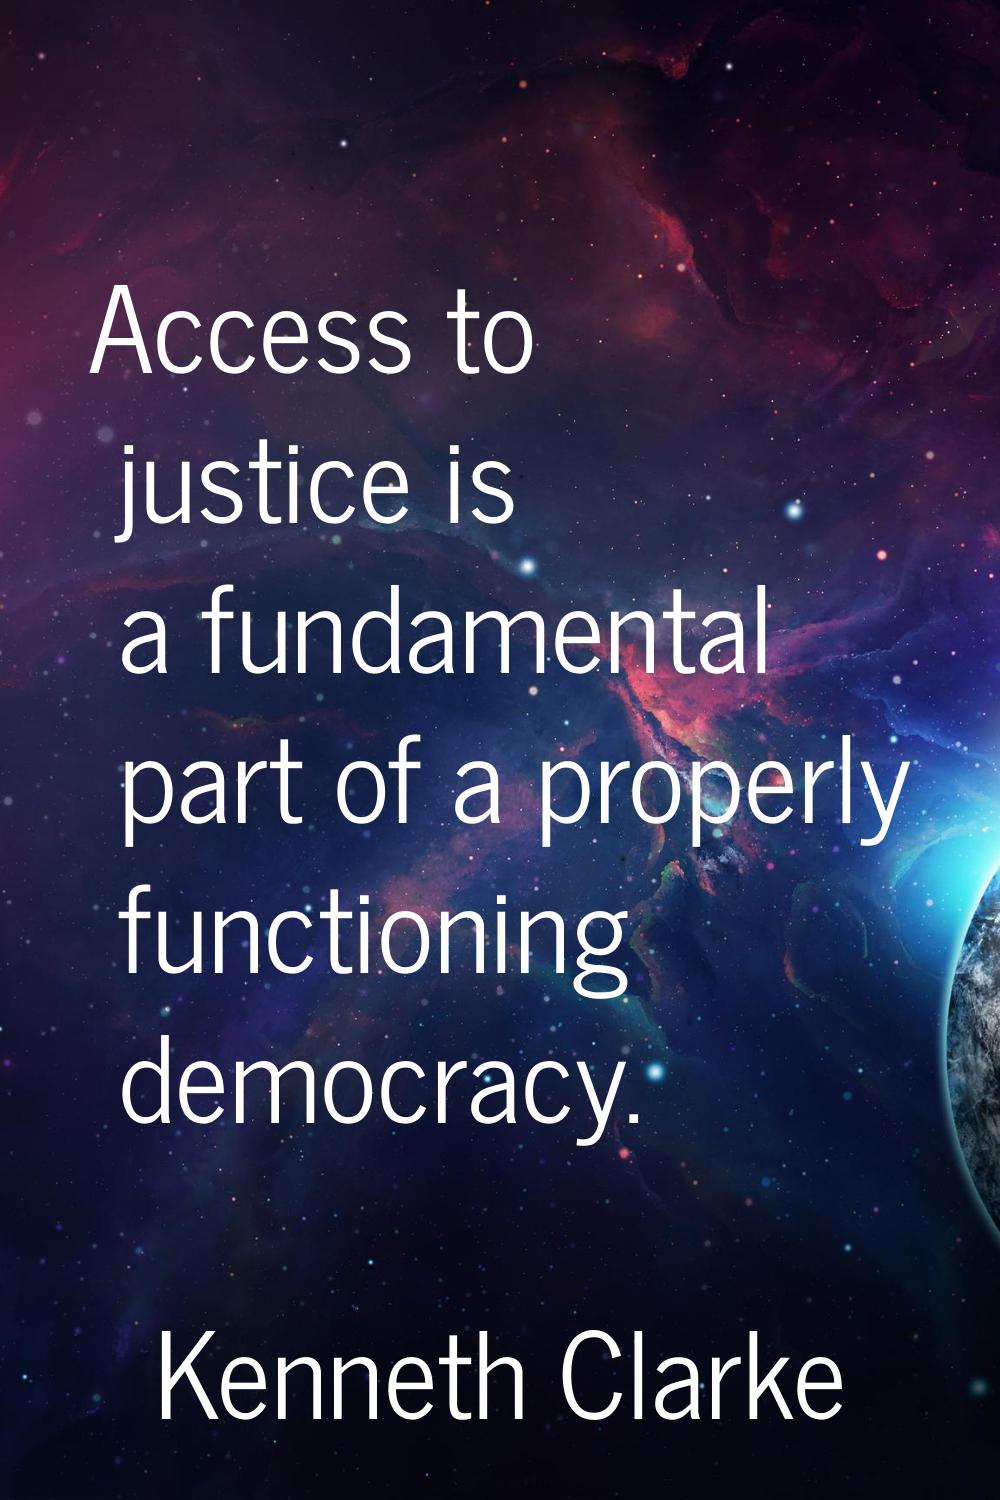 Access to justice is a fundamental part of a properly functioning democracy.